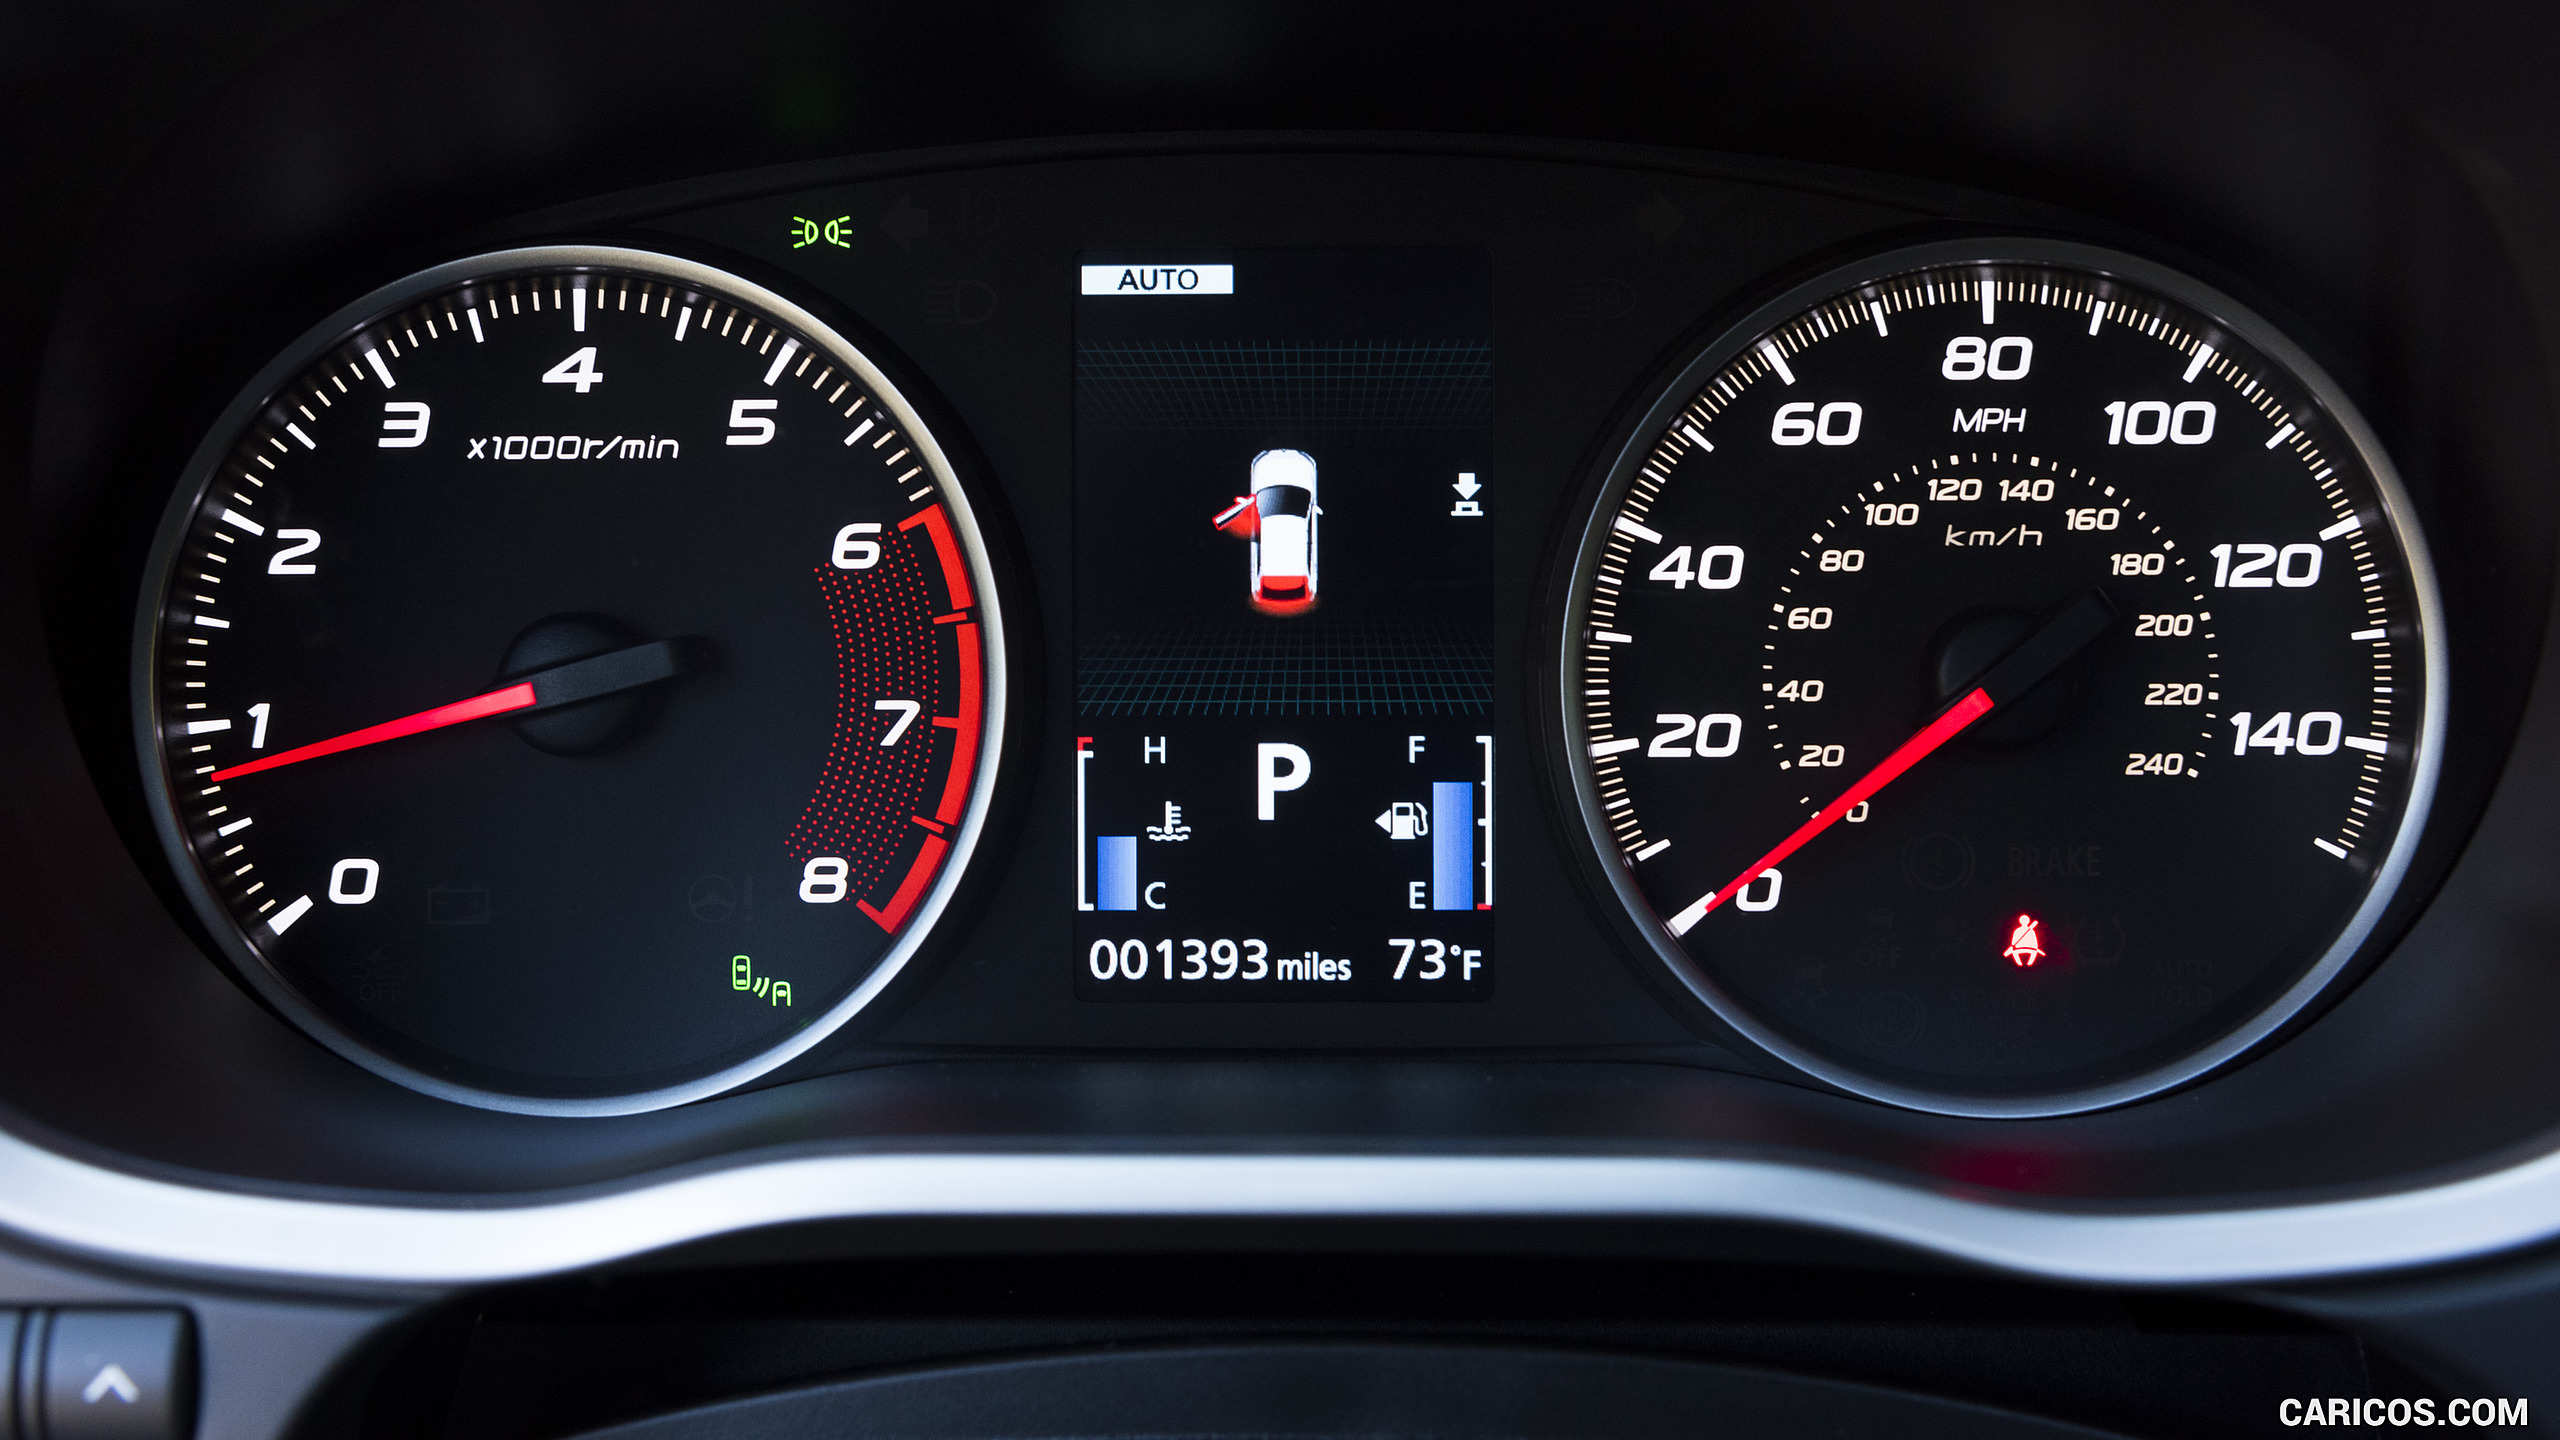 2018 Mitsubishi Eclipse Cross - Instrument Cluster, #170 of 173